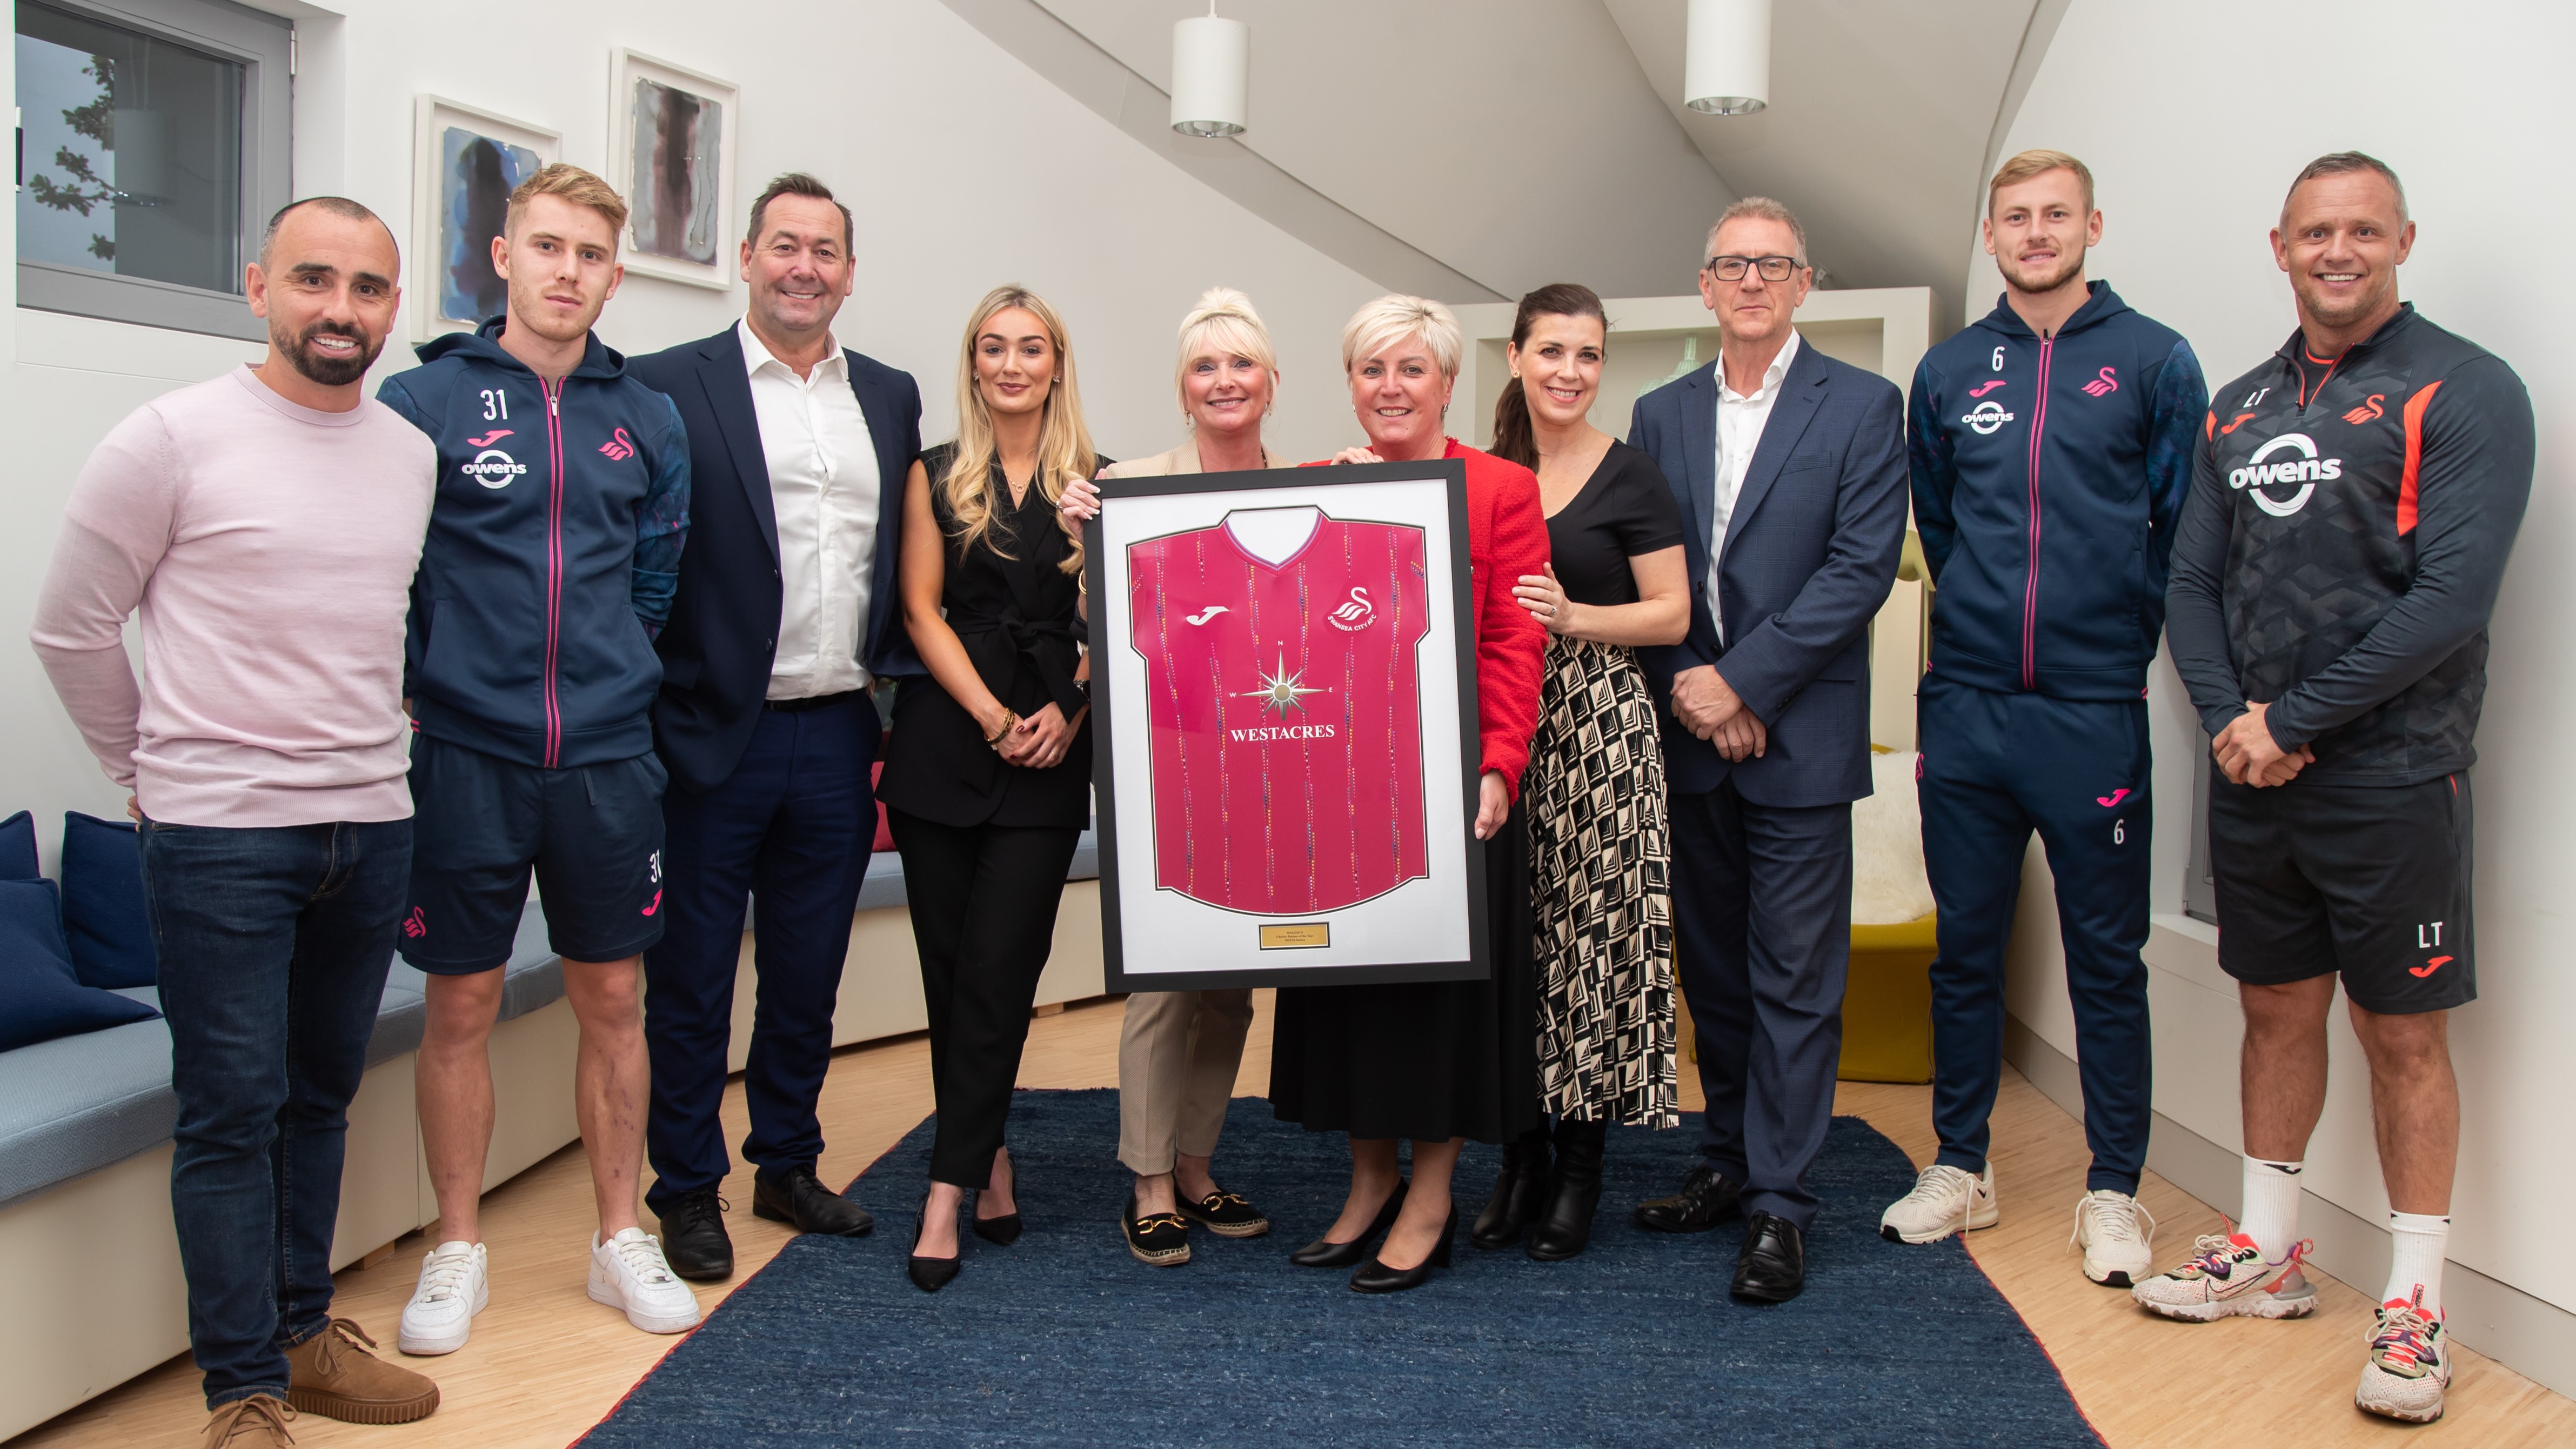 Westacres, SBS and the Swans hand over third shirt to Maggie's